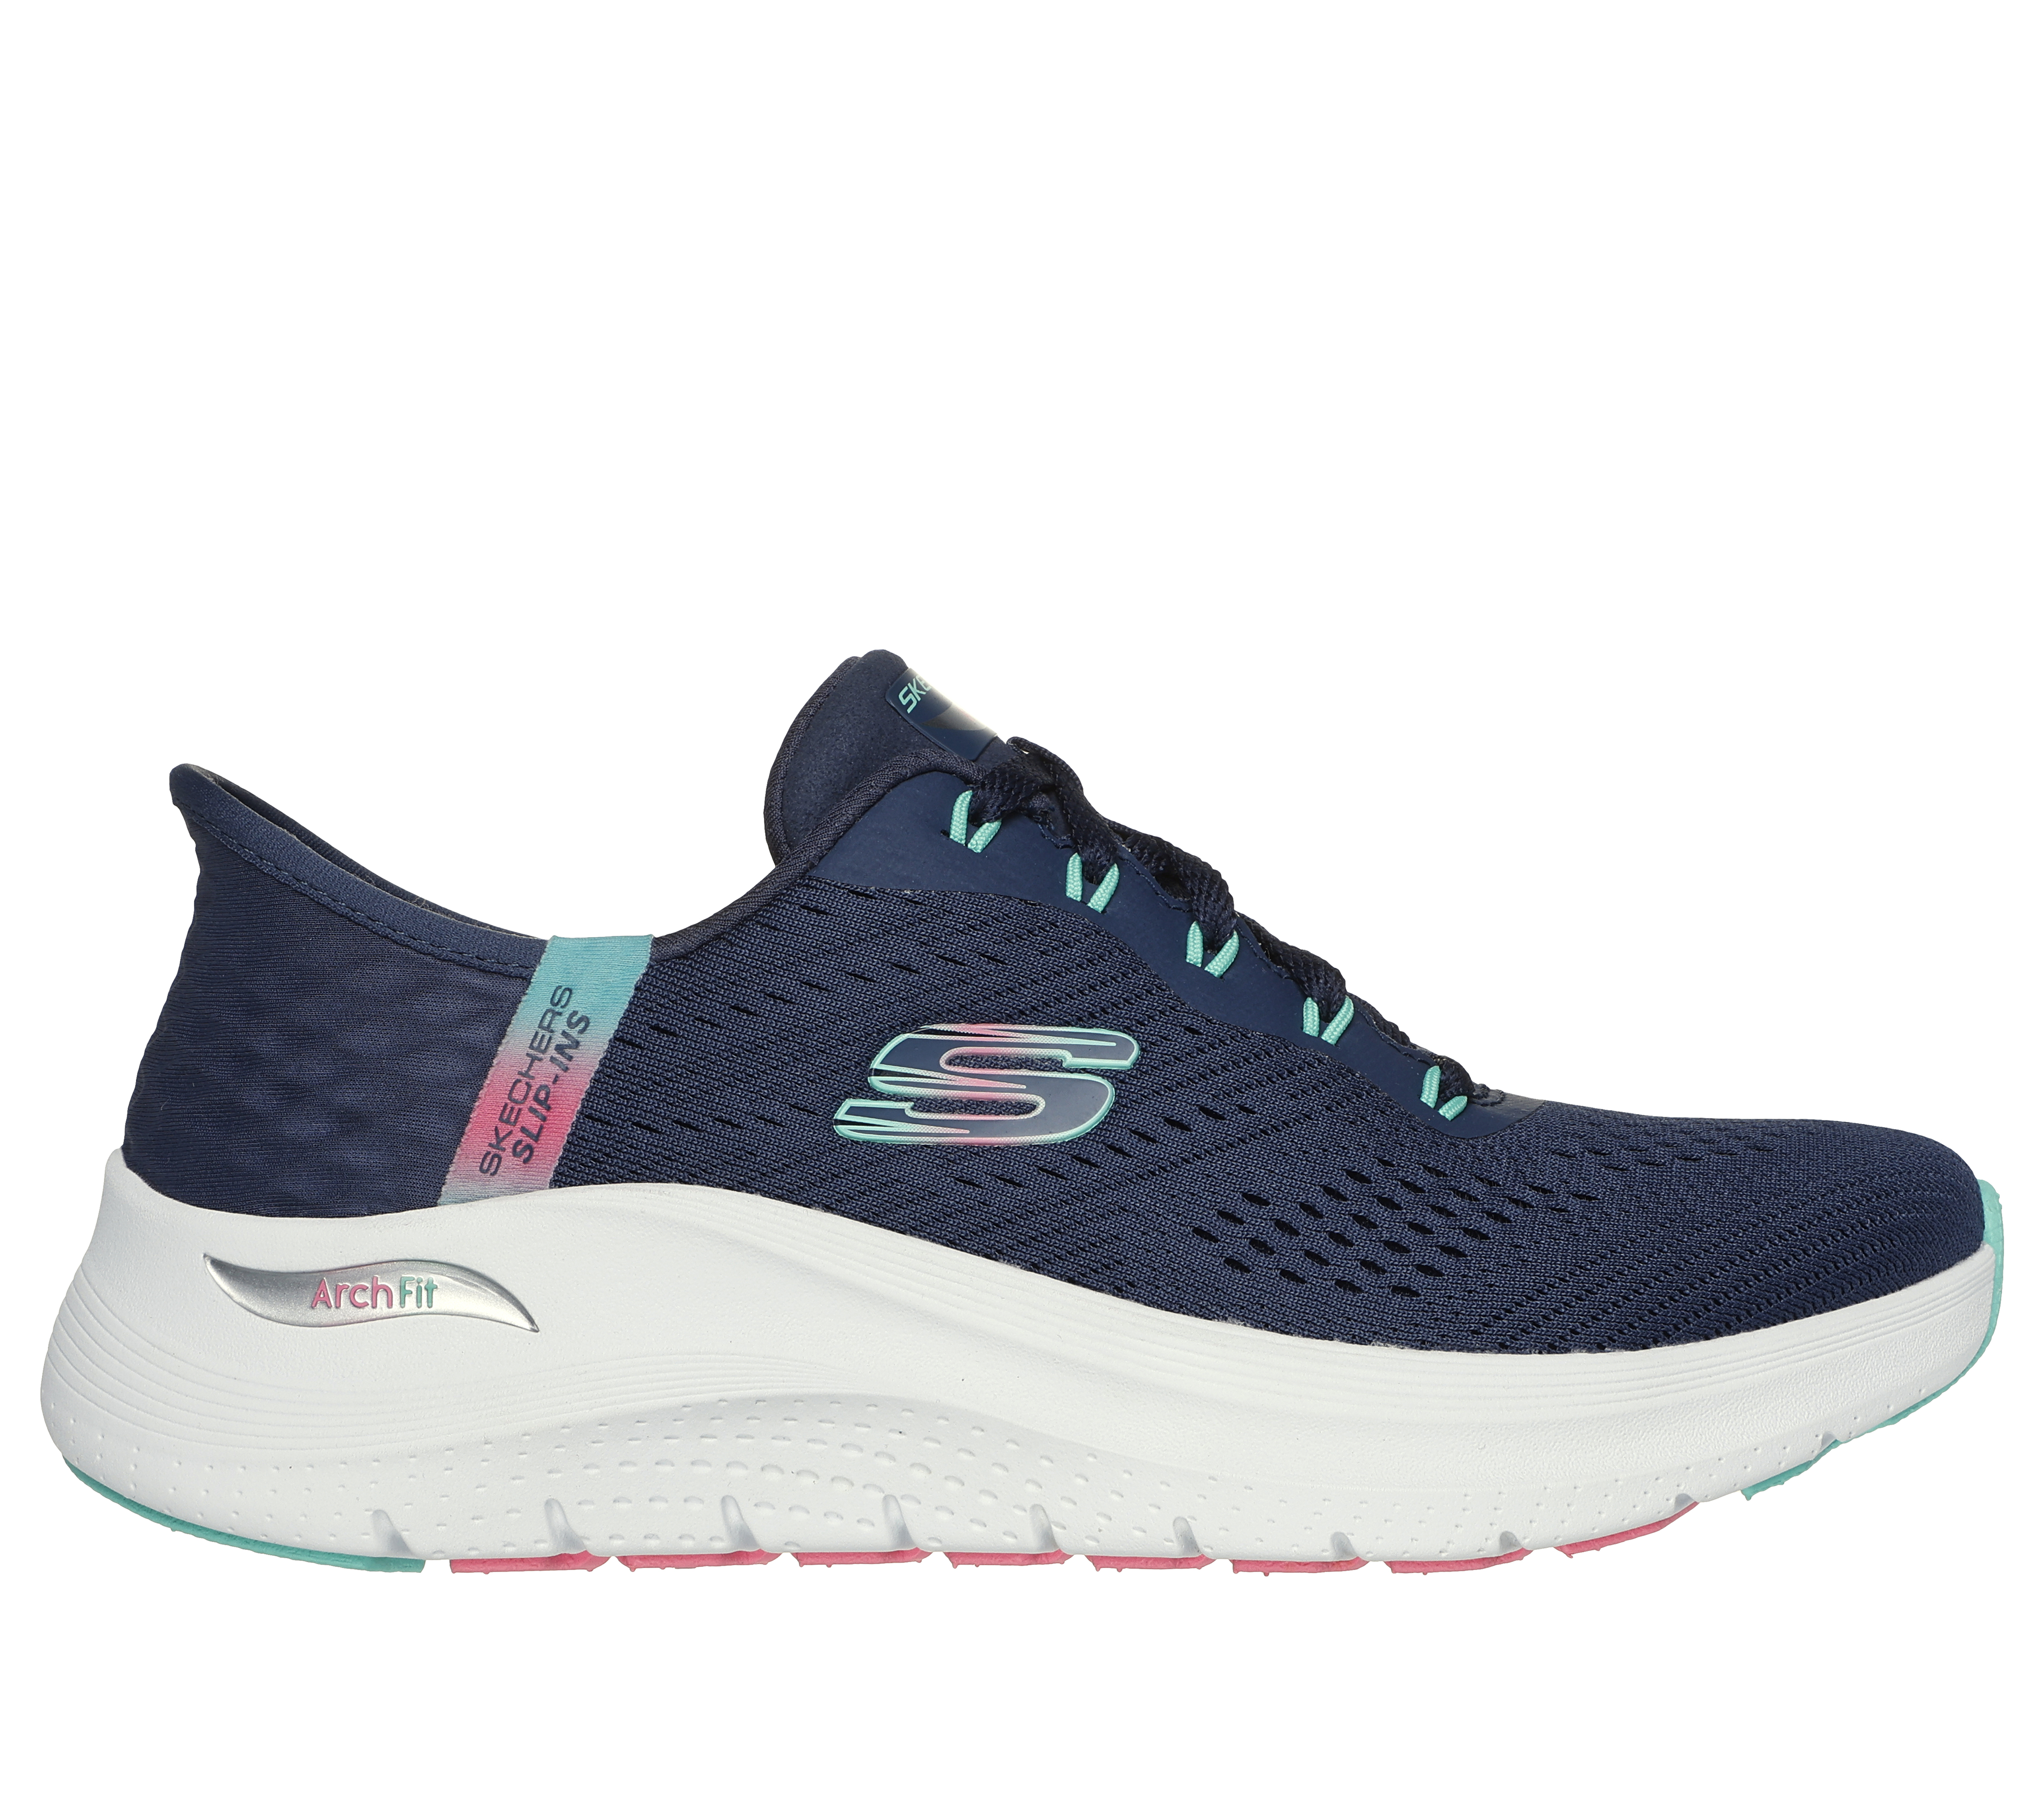 Skechers Women's Arch Fit 2.0 - Rich Vision Nvpk Navy Pink, Buy Skechers  Women's Arch Fit 2.0 - Rich Vision Nvpk Navy Pink here